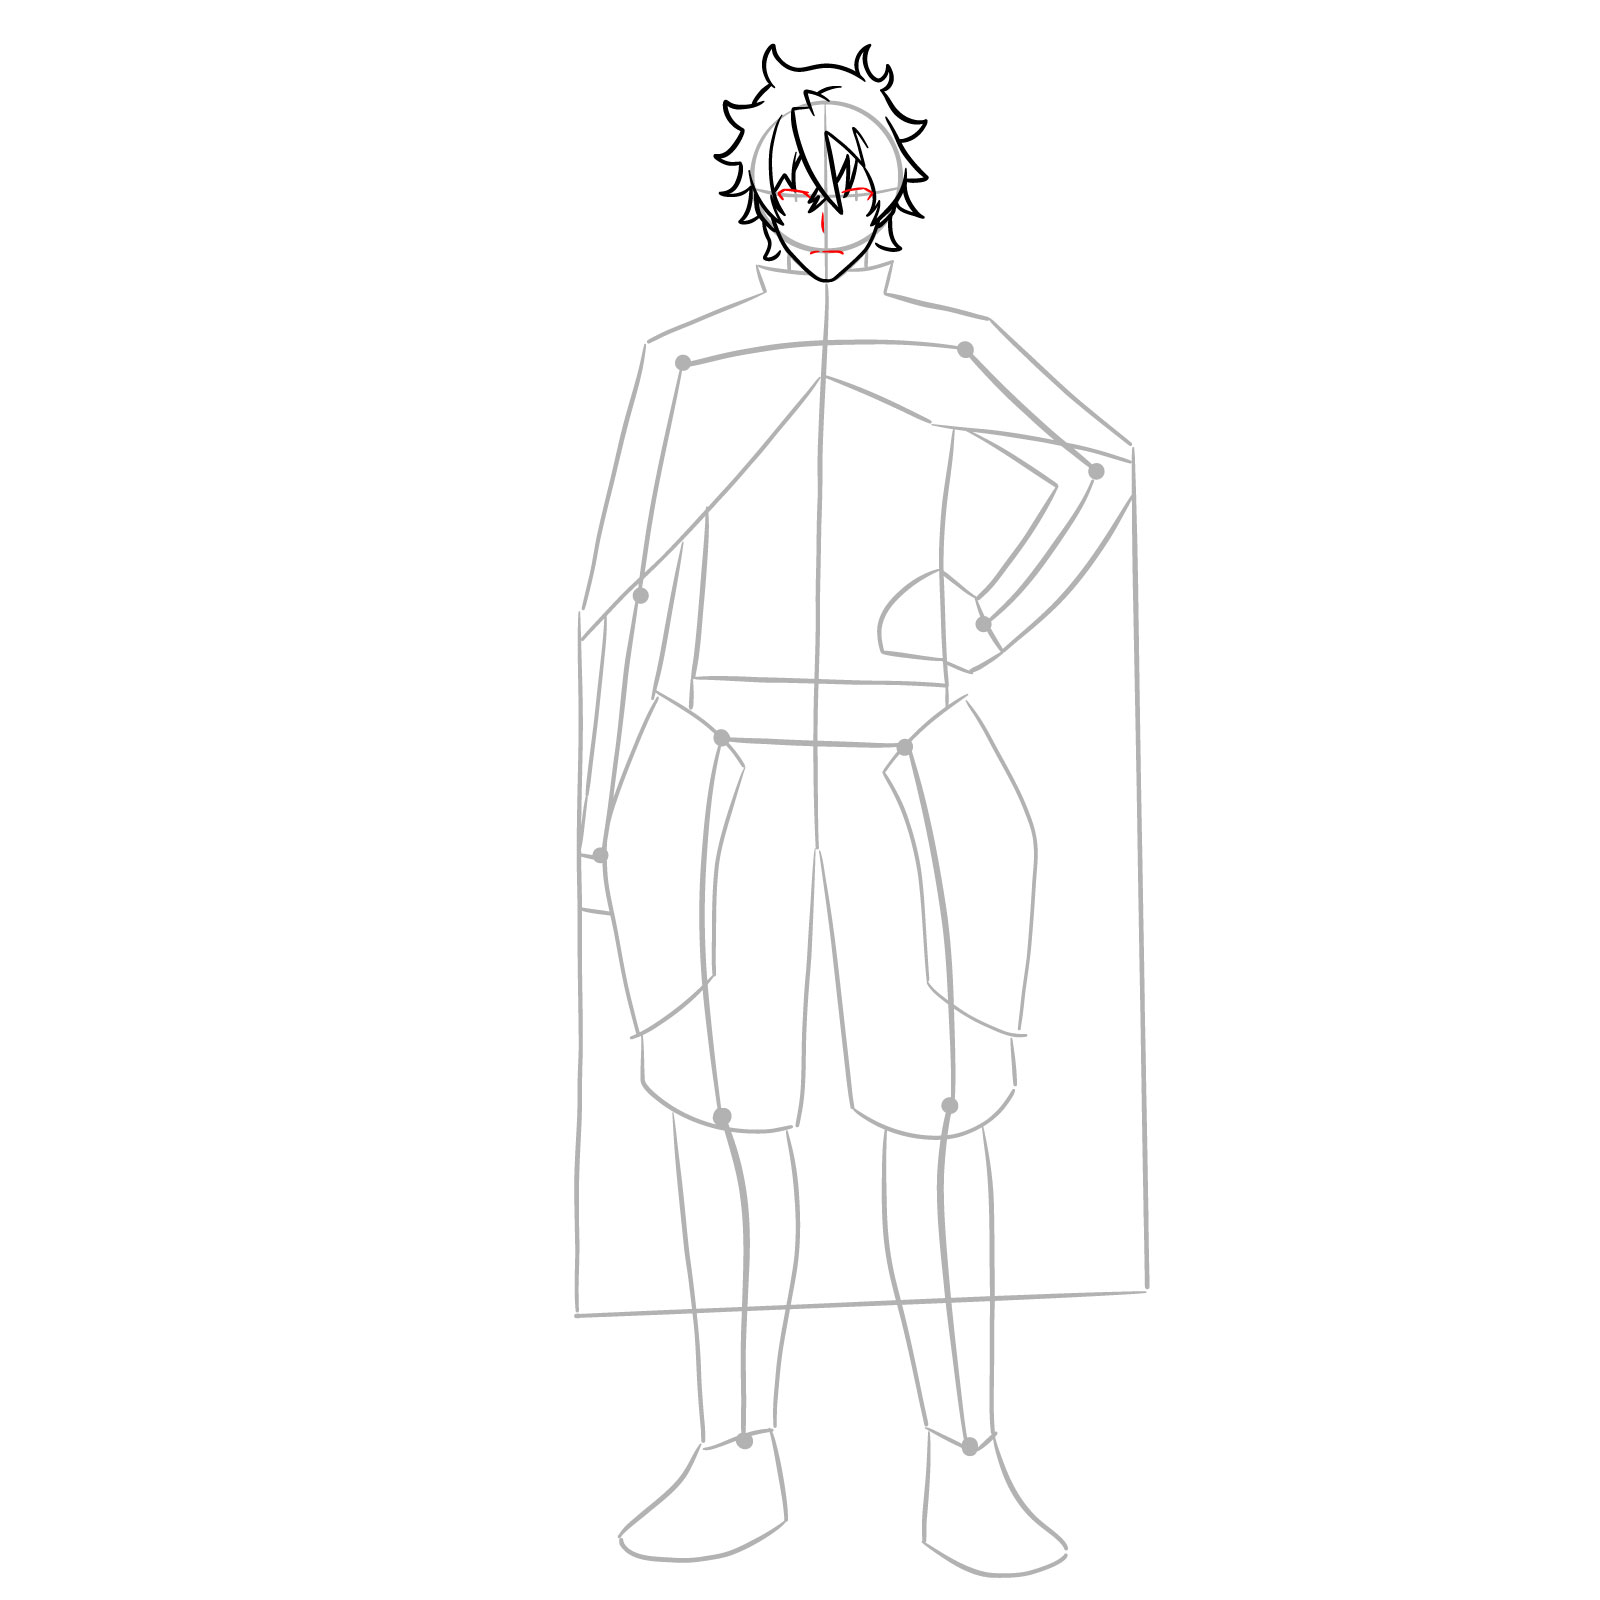 How to draw Naofumi Iwatani from The Rising of the Shield Hero - step 07